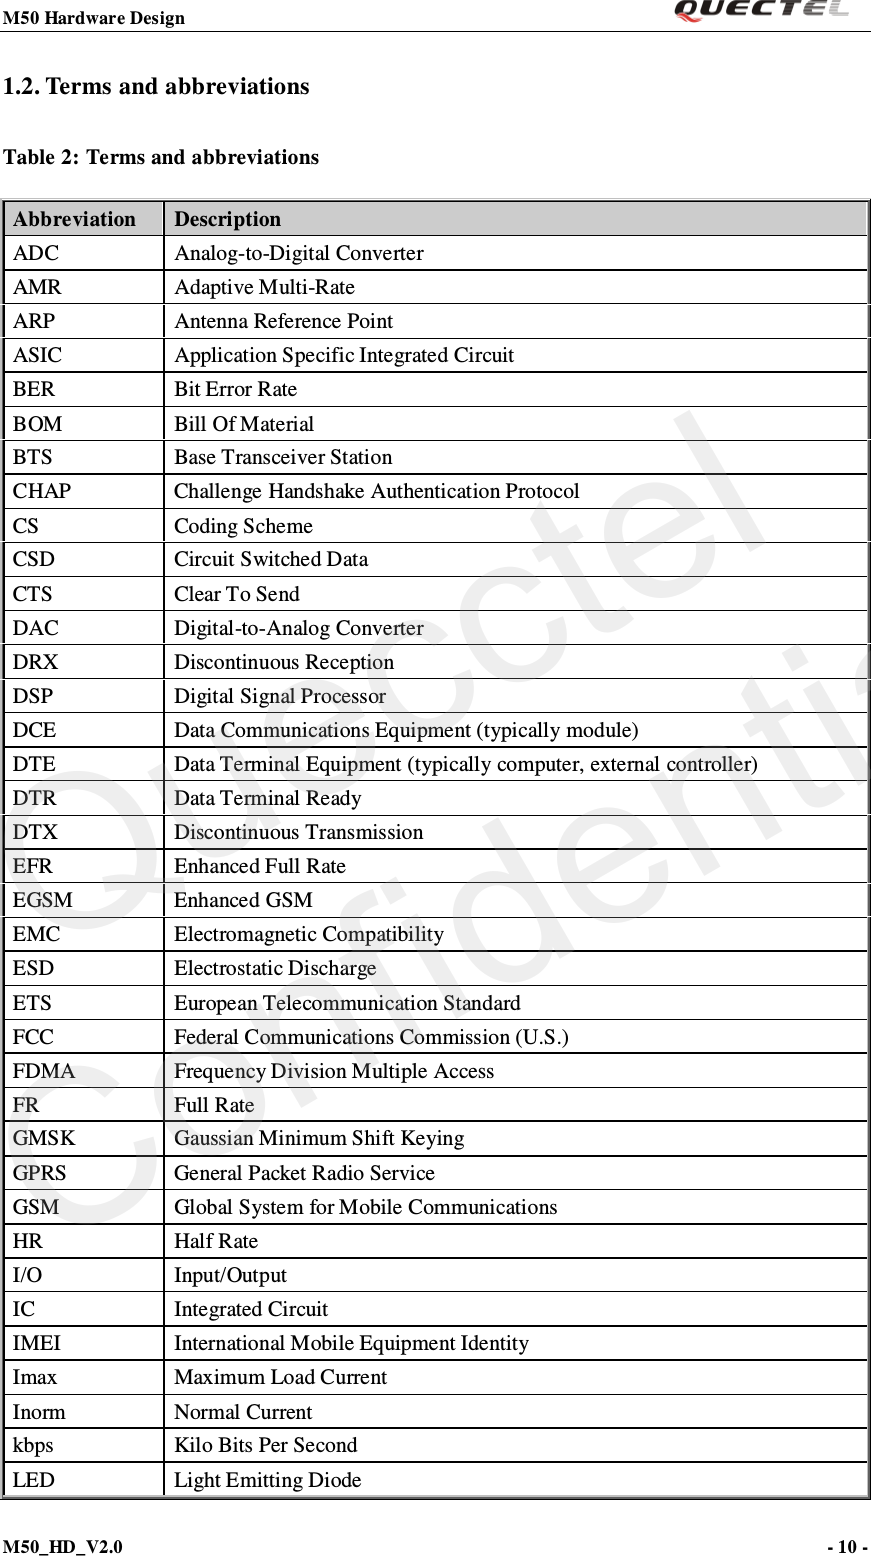 M50 Hardware Design                                                                M50_HD_V2.0                                                                      - 10 -   1.2. Terms and abbreviations Table 2: Terms and abbreviations Abbreviation   Description ADC   Analog-to-Digital Converter AMR Adaptive Multi-Rate ARP   Antenna Reference Point ASIC   Application Specific Integrated Circuit BER   Bit Error Rate BOM Bill Of Material BTS   Base Transceiver Station CHAP   Challenge Handshake Authentication Protocol CS   Coding Scheme CSD   Circuit Switched Data CTS   Clear To Send DAC   Digital-to-Analog Converter DRX   Discontinuous Reception DSP   Digital Signal Processor DCE Data Communications Equipment (typically module) DTE   Data Terminal Equipment (typically computer, external controller) DTR   Data Terminal Ready DTX   Discontinuous Transmission EFR   Enhanced Full Rate EGSM   Enhanced GSM EMC   Electromagnetic Compatibility ESD   Electrostatic Discharge ETS   European Telecommunication Standard FCC   Federal Communications Commission (U.S.) FDMA   Frequency Division Multiple Access FR   Full Rate GMSK Gaussian Minimum Shift Keying GPRS   General Packet Radio Service GSM   Global System for Mobile Communications HR   Half Rate I/O   Input/Output IC   Integrated Circuit IMEI   International Mobile Equipment Identity Imax Maximum Load Current Inorm Normal Current kbps   Kilo Bits Per Second LED   Light Emitting Diode Quecctel Confidential